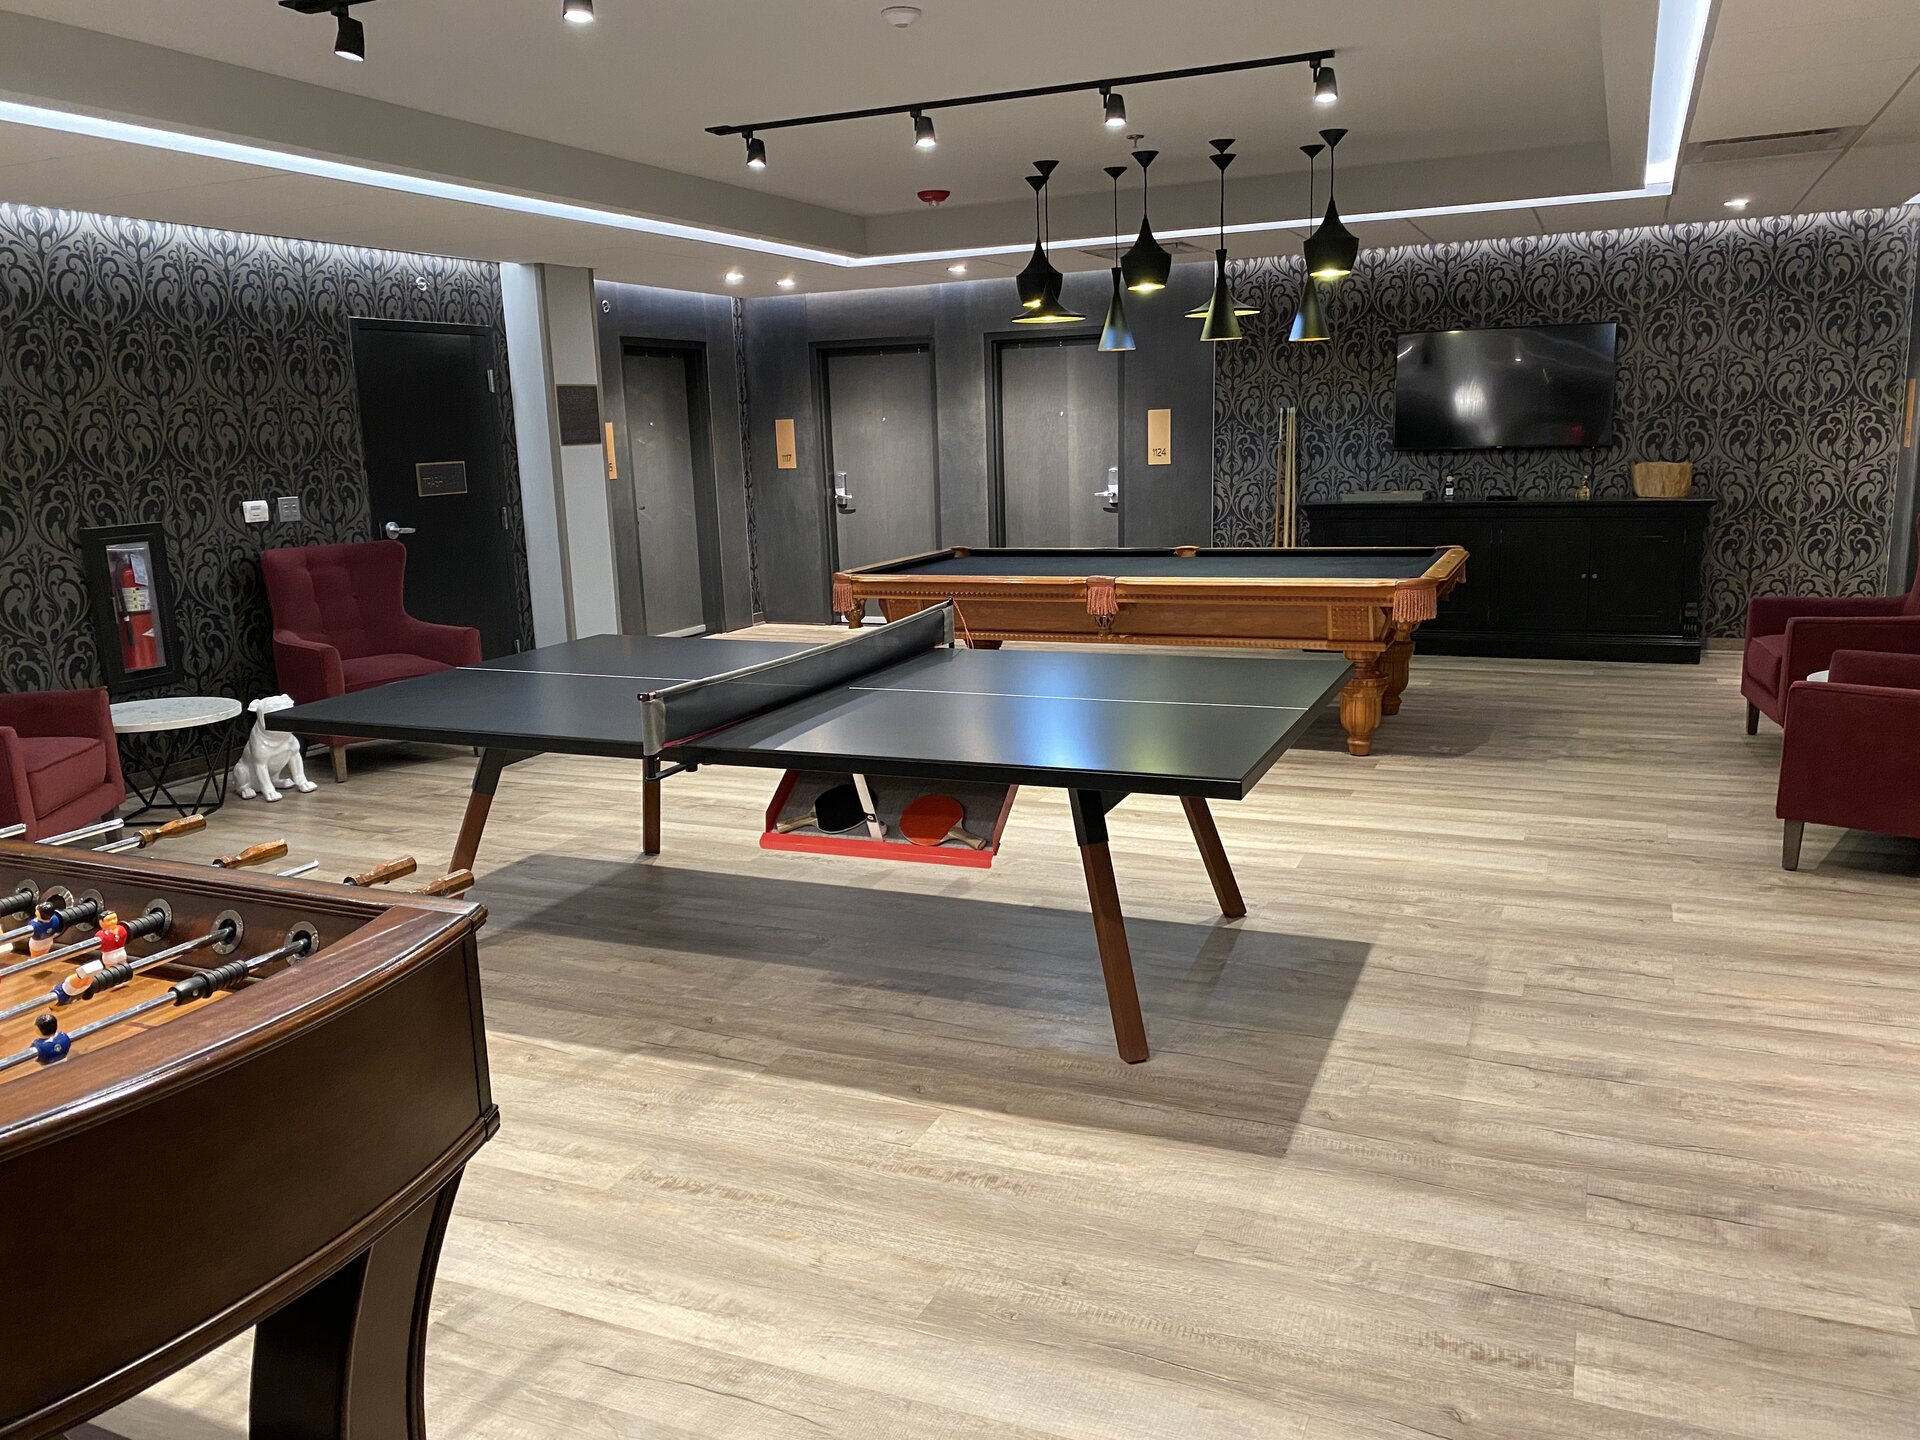 Ping pong and pool tables